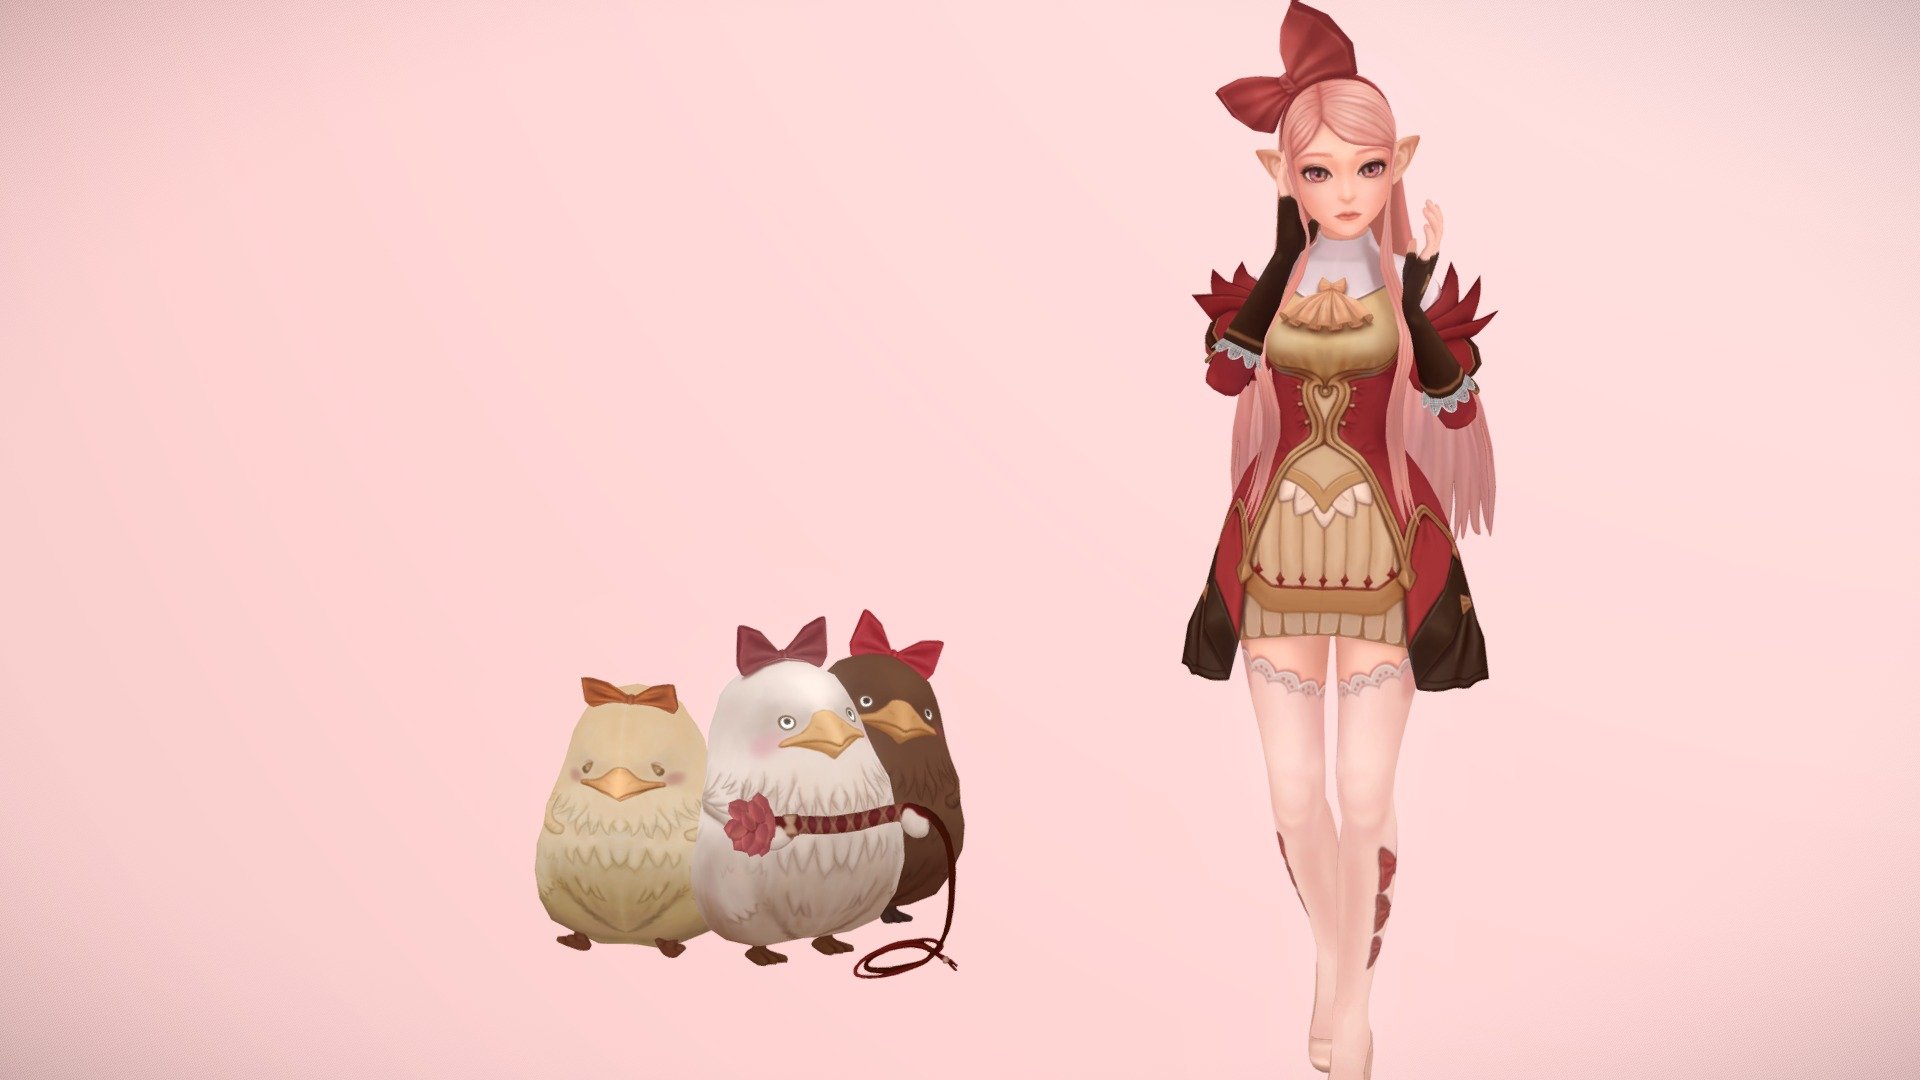 3 chikens with DK online npc - Lina 3D charactet modeling - 3D model by yeori00 3d model